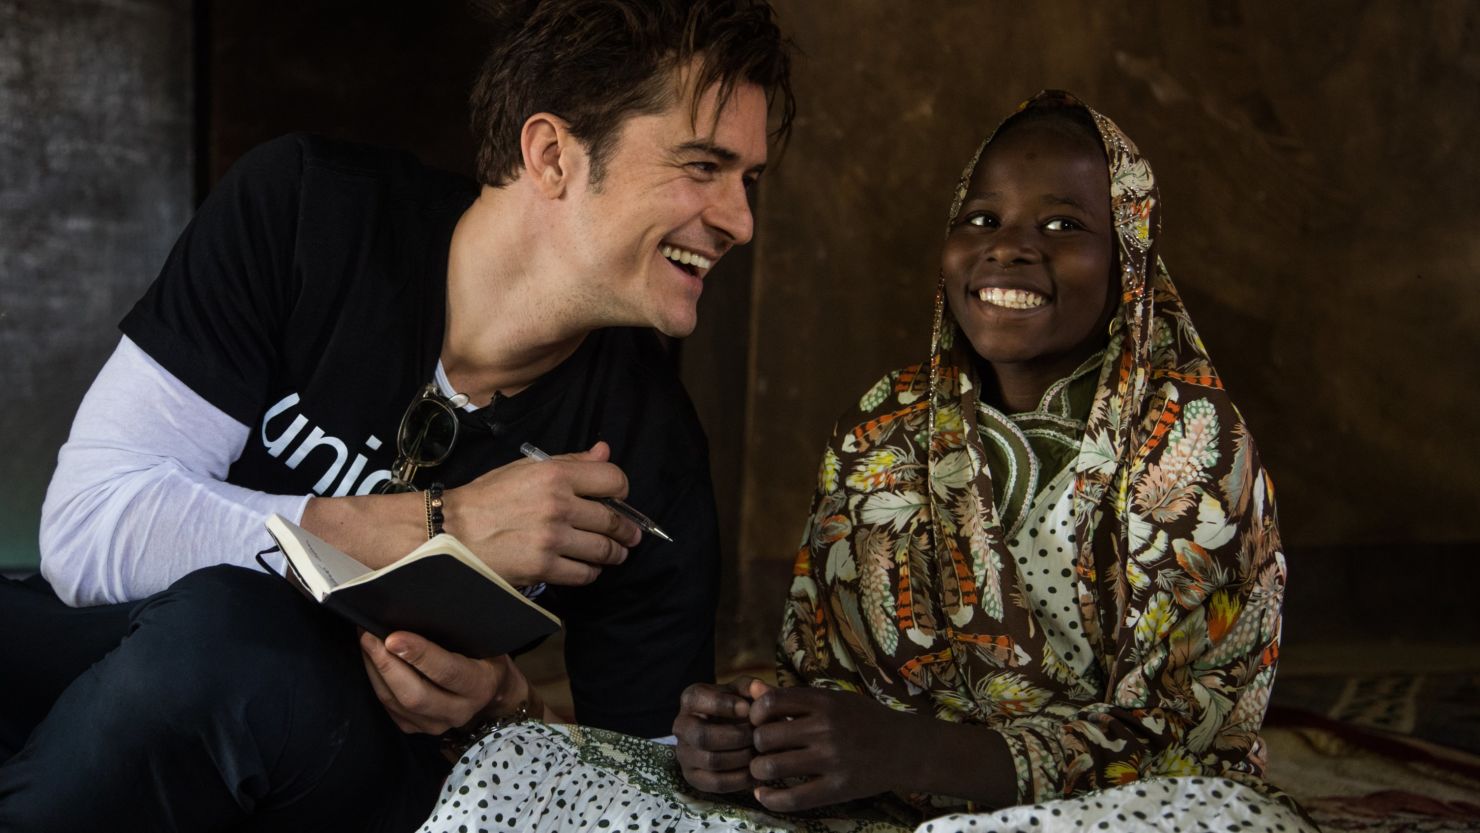 UNICEF Goodwill Ambassador Orlando Bloom (left) smiles as he speaks with twelve-year-old Eta Ibrahim at her family's home, where she lives with her father - the village chief, and her four siblings, in Bosso, Niger, Sunday 19 February 2017. 